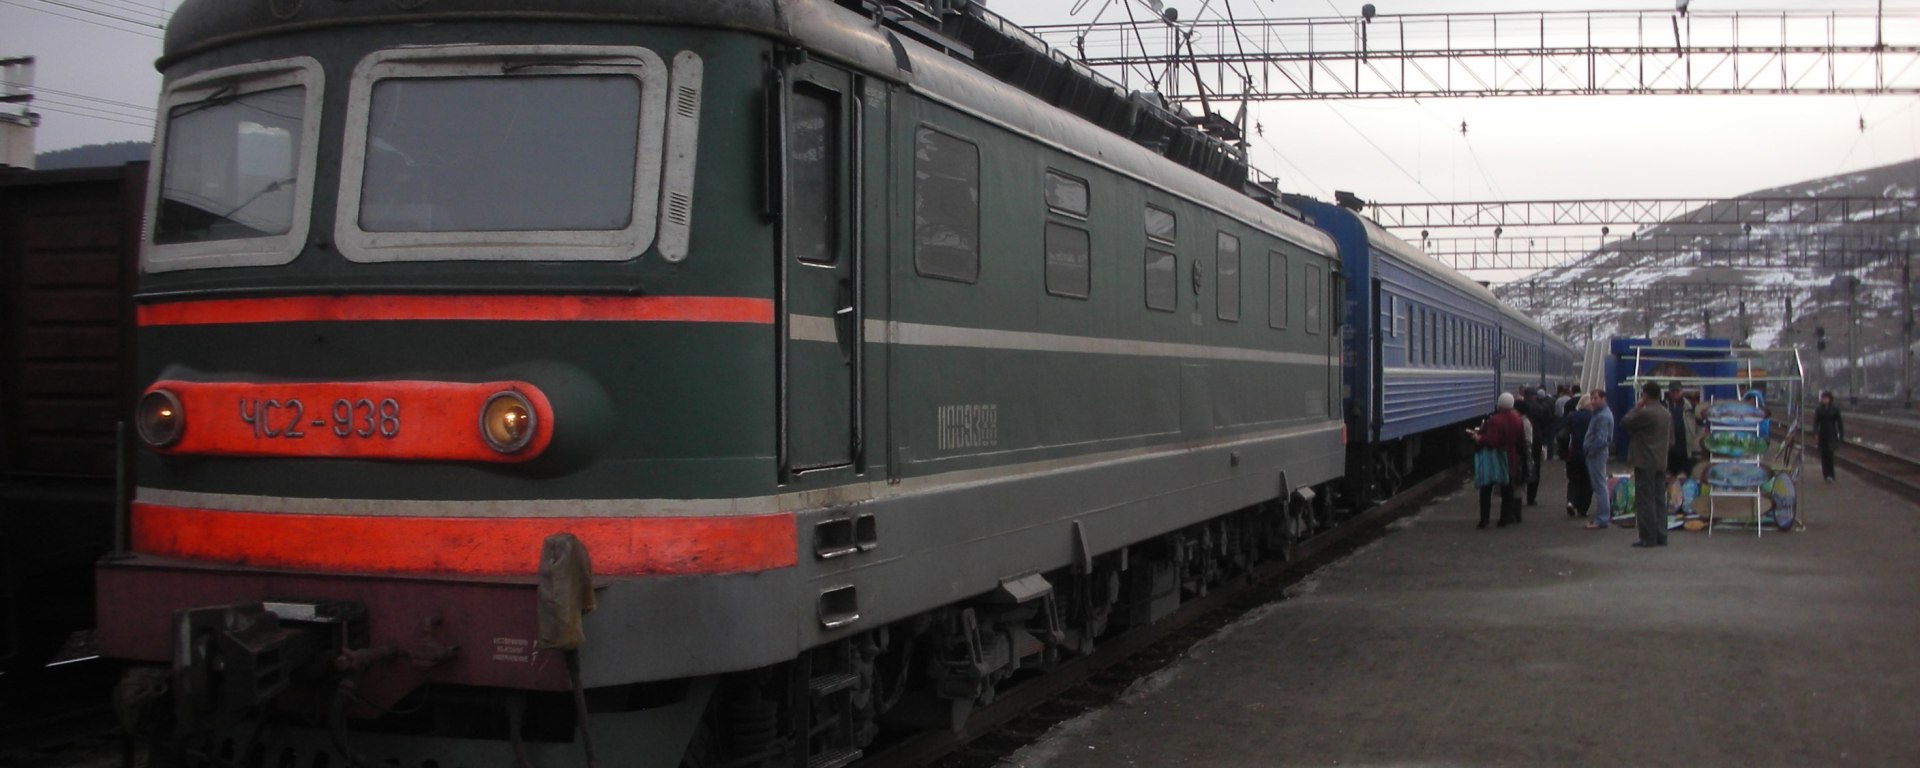 Dark green electric train locomotive pulling a passenger train in the Ural Mountains of Russia